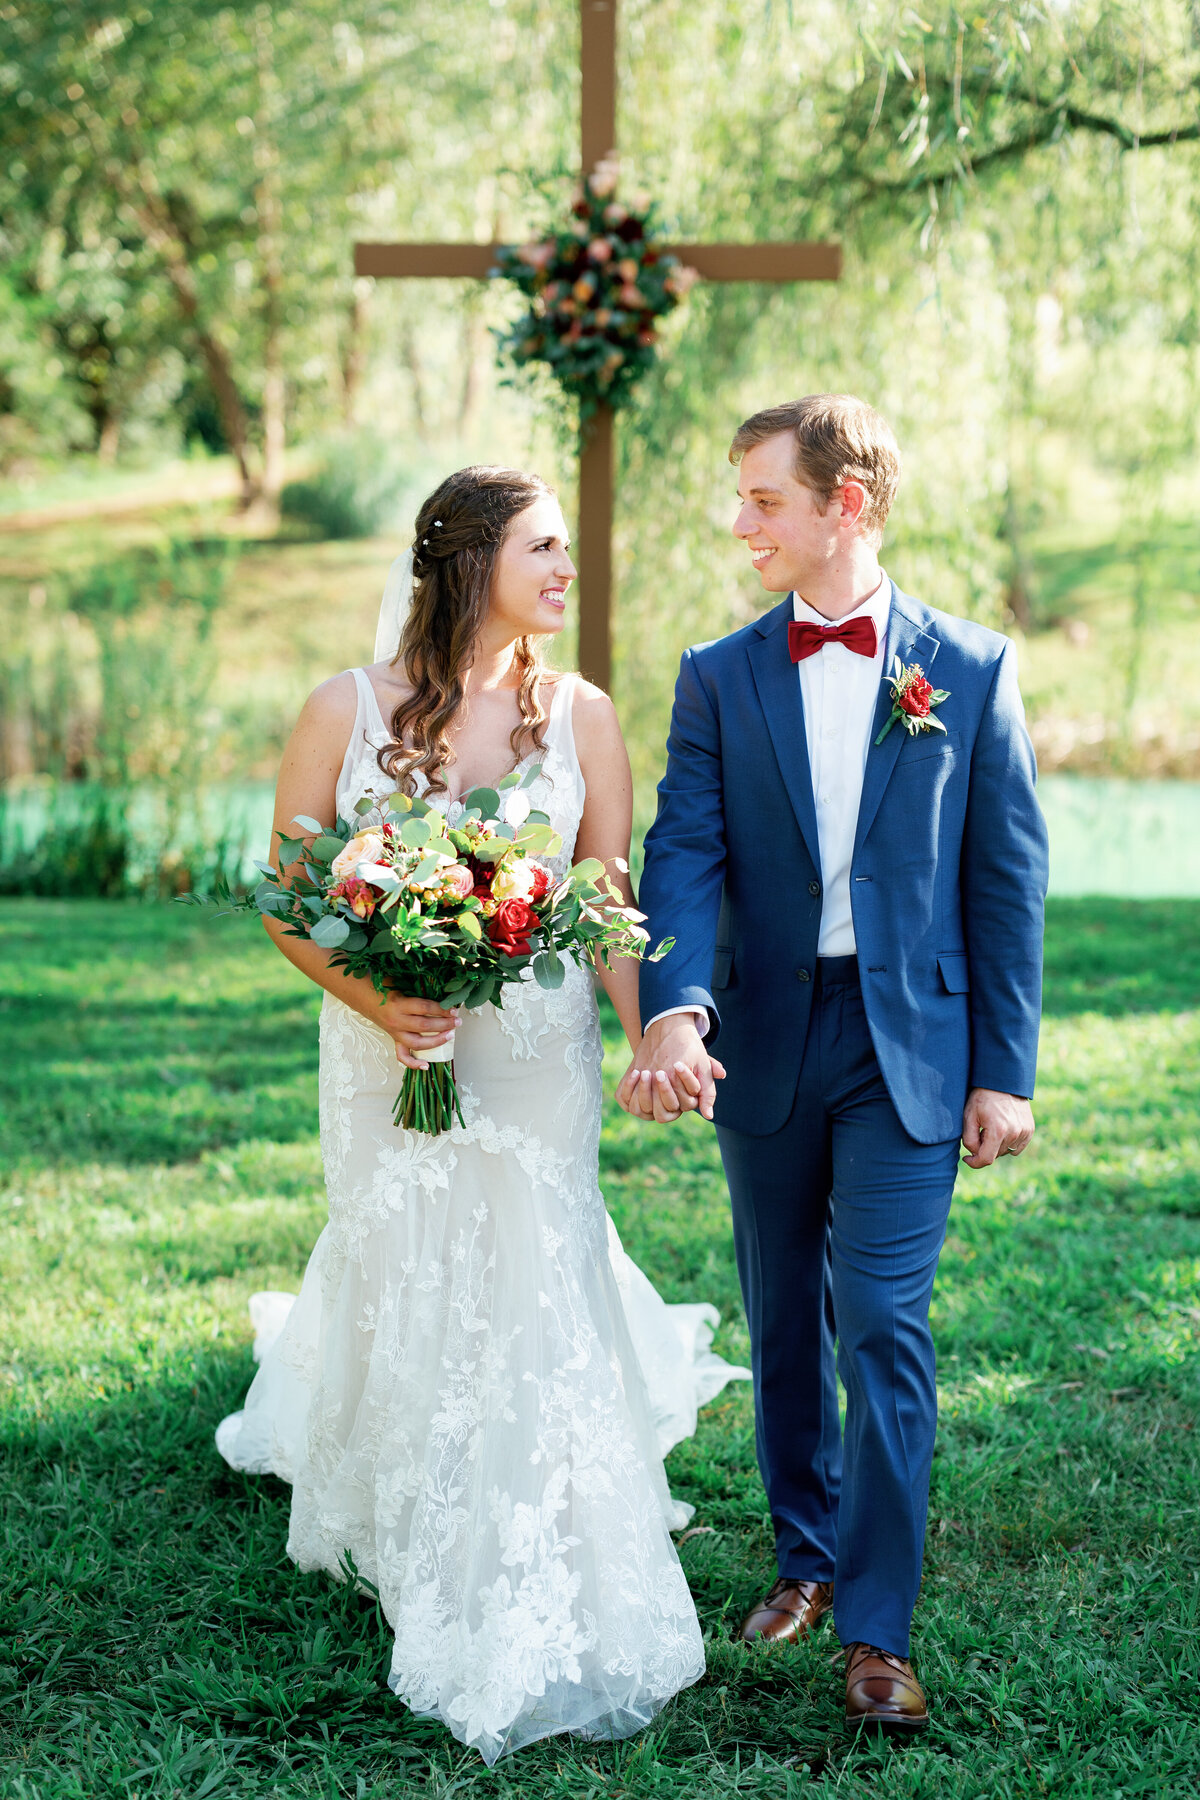 Alaina and Russ Wedding - Coopers Cove at Heritage Park - East Tennessee Wedding Photographer - Alaina René Photography-106